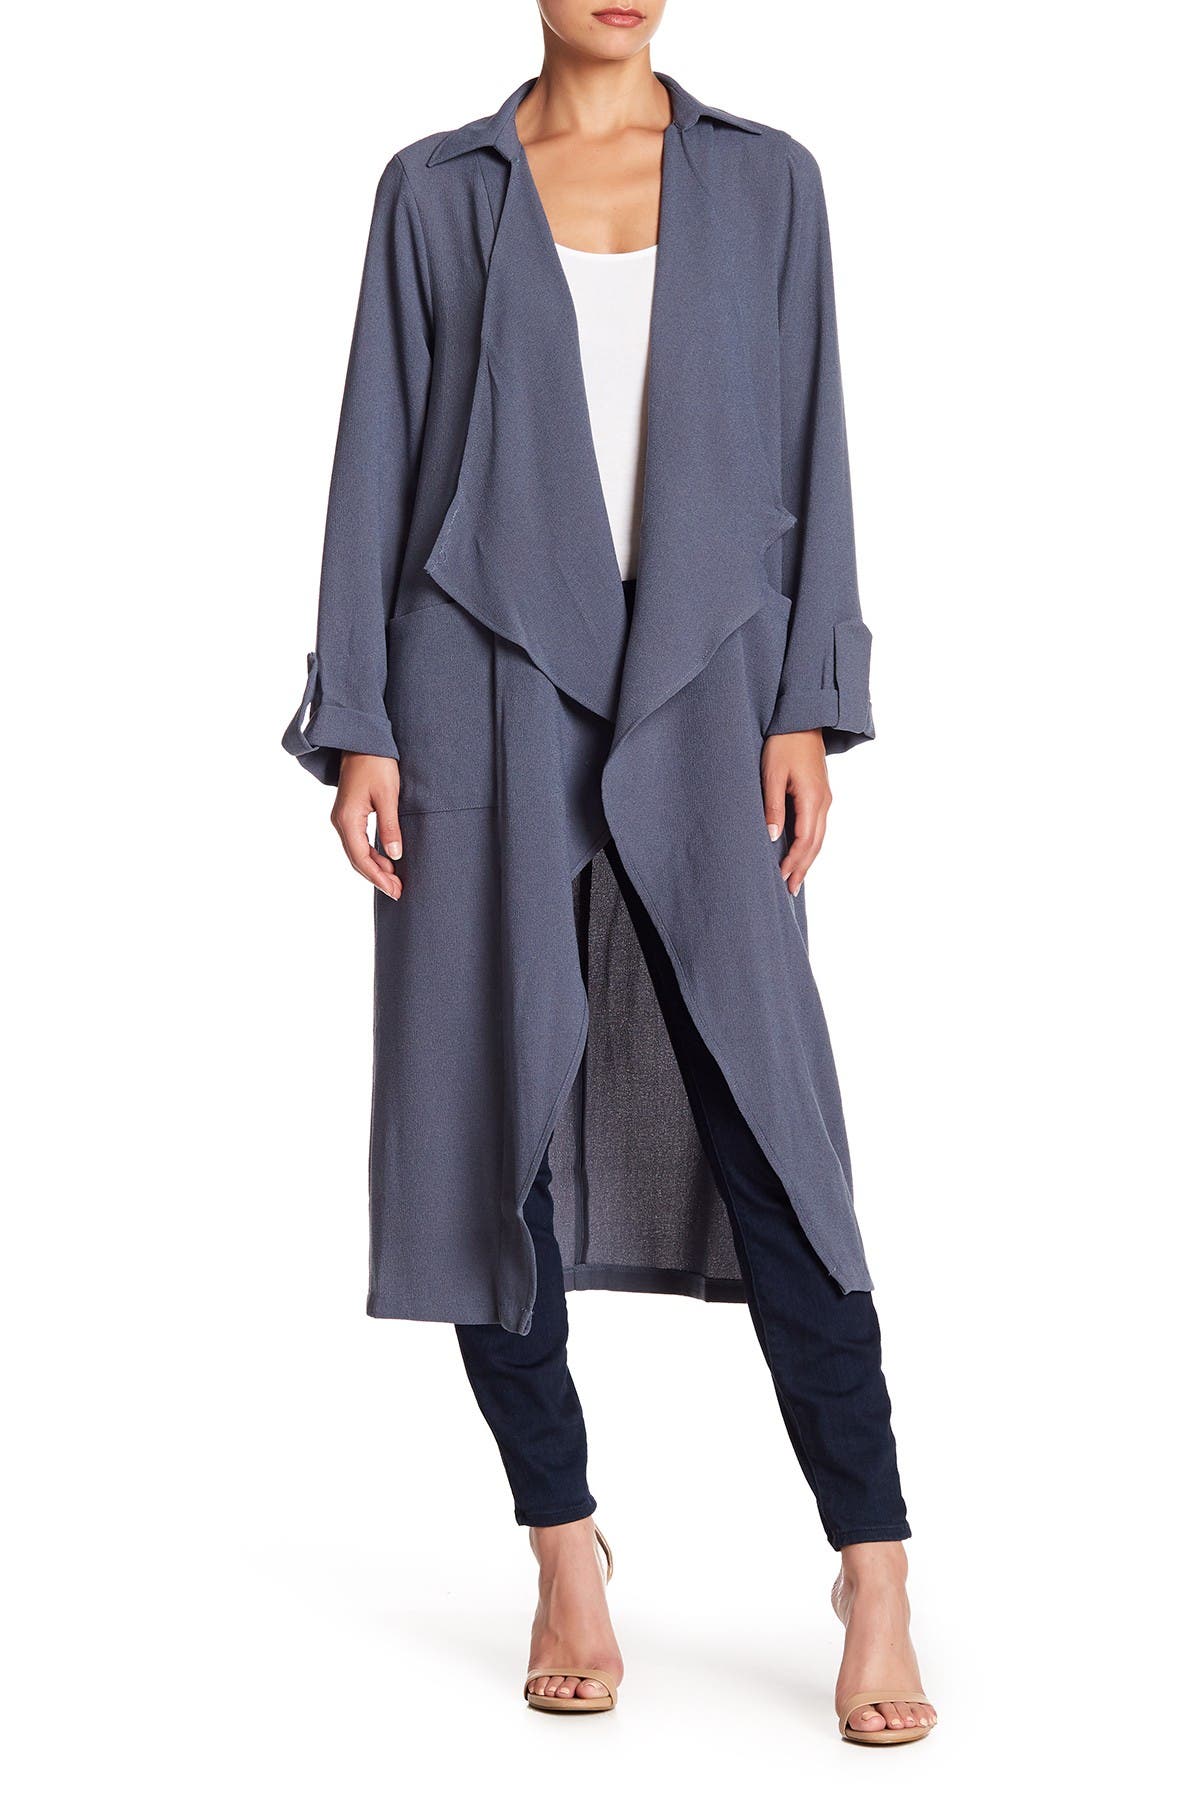 Lush | Draped Open Front Trench Duster | Nordstrom Rack